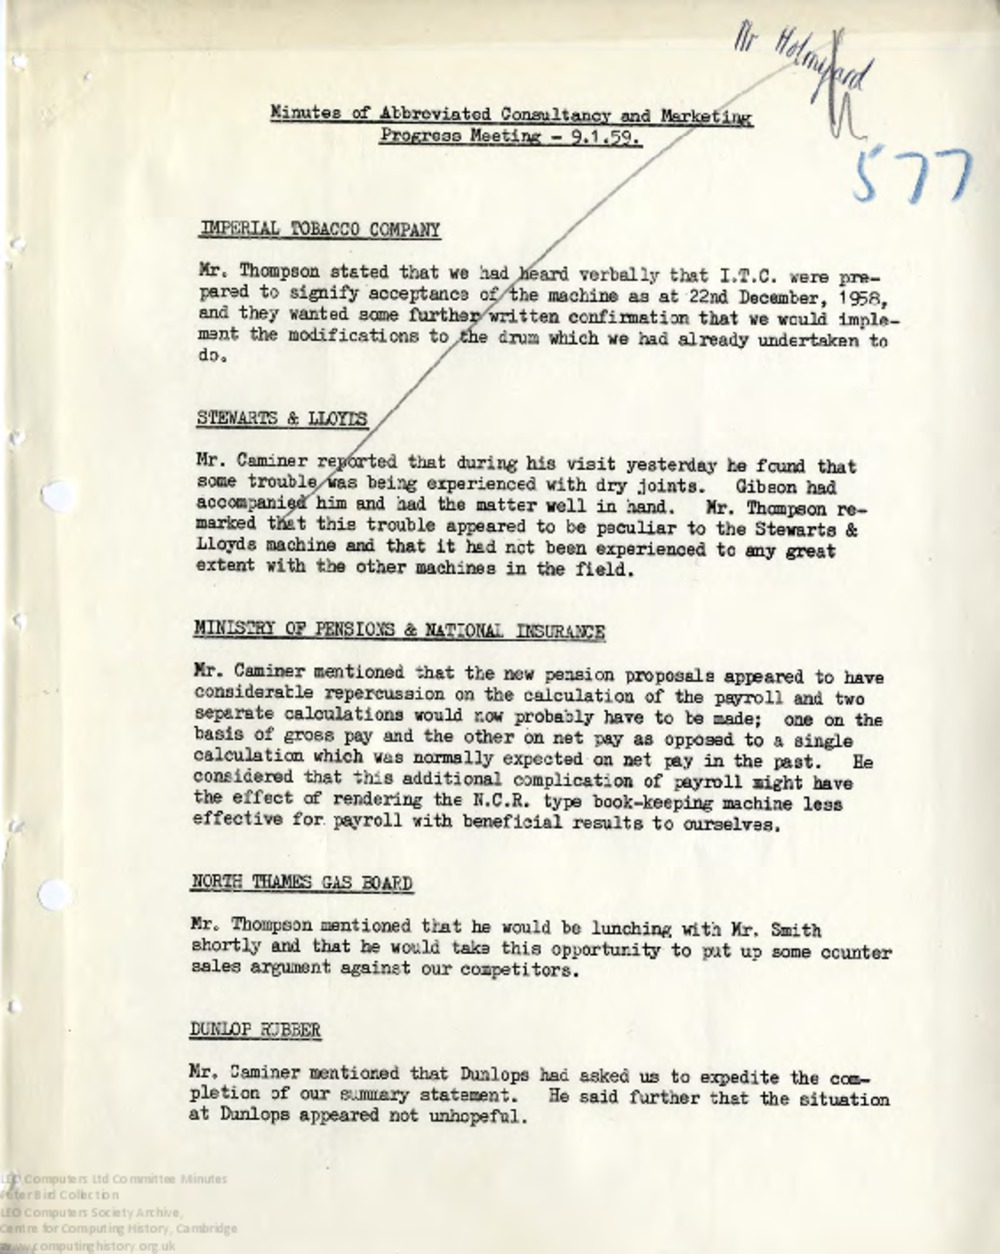 Article: 64468 Abbreviated Consultancy and Marketing Progress Report and Minutes, 9th Jan 1959